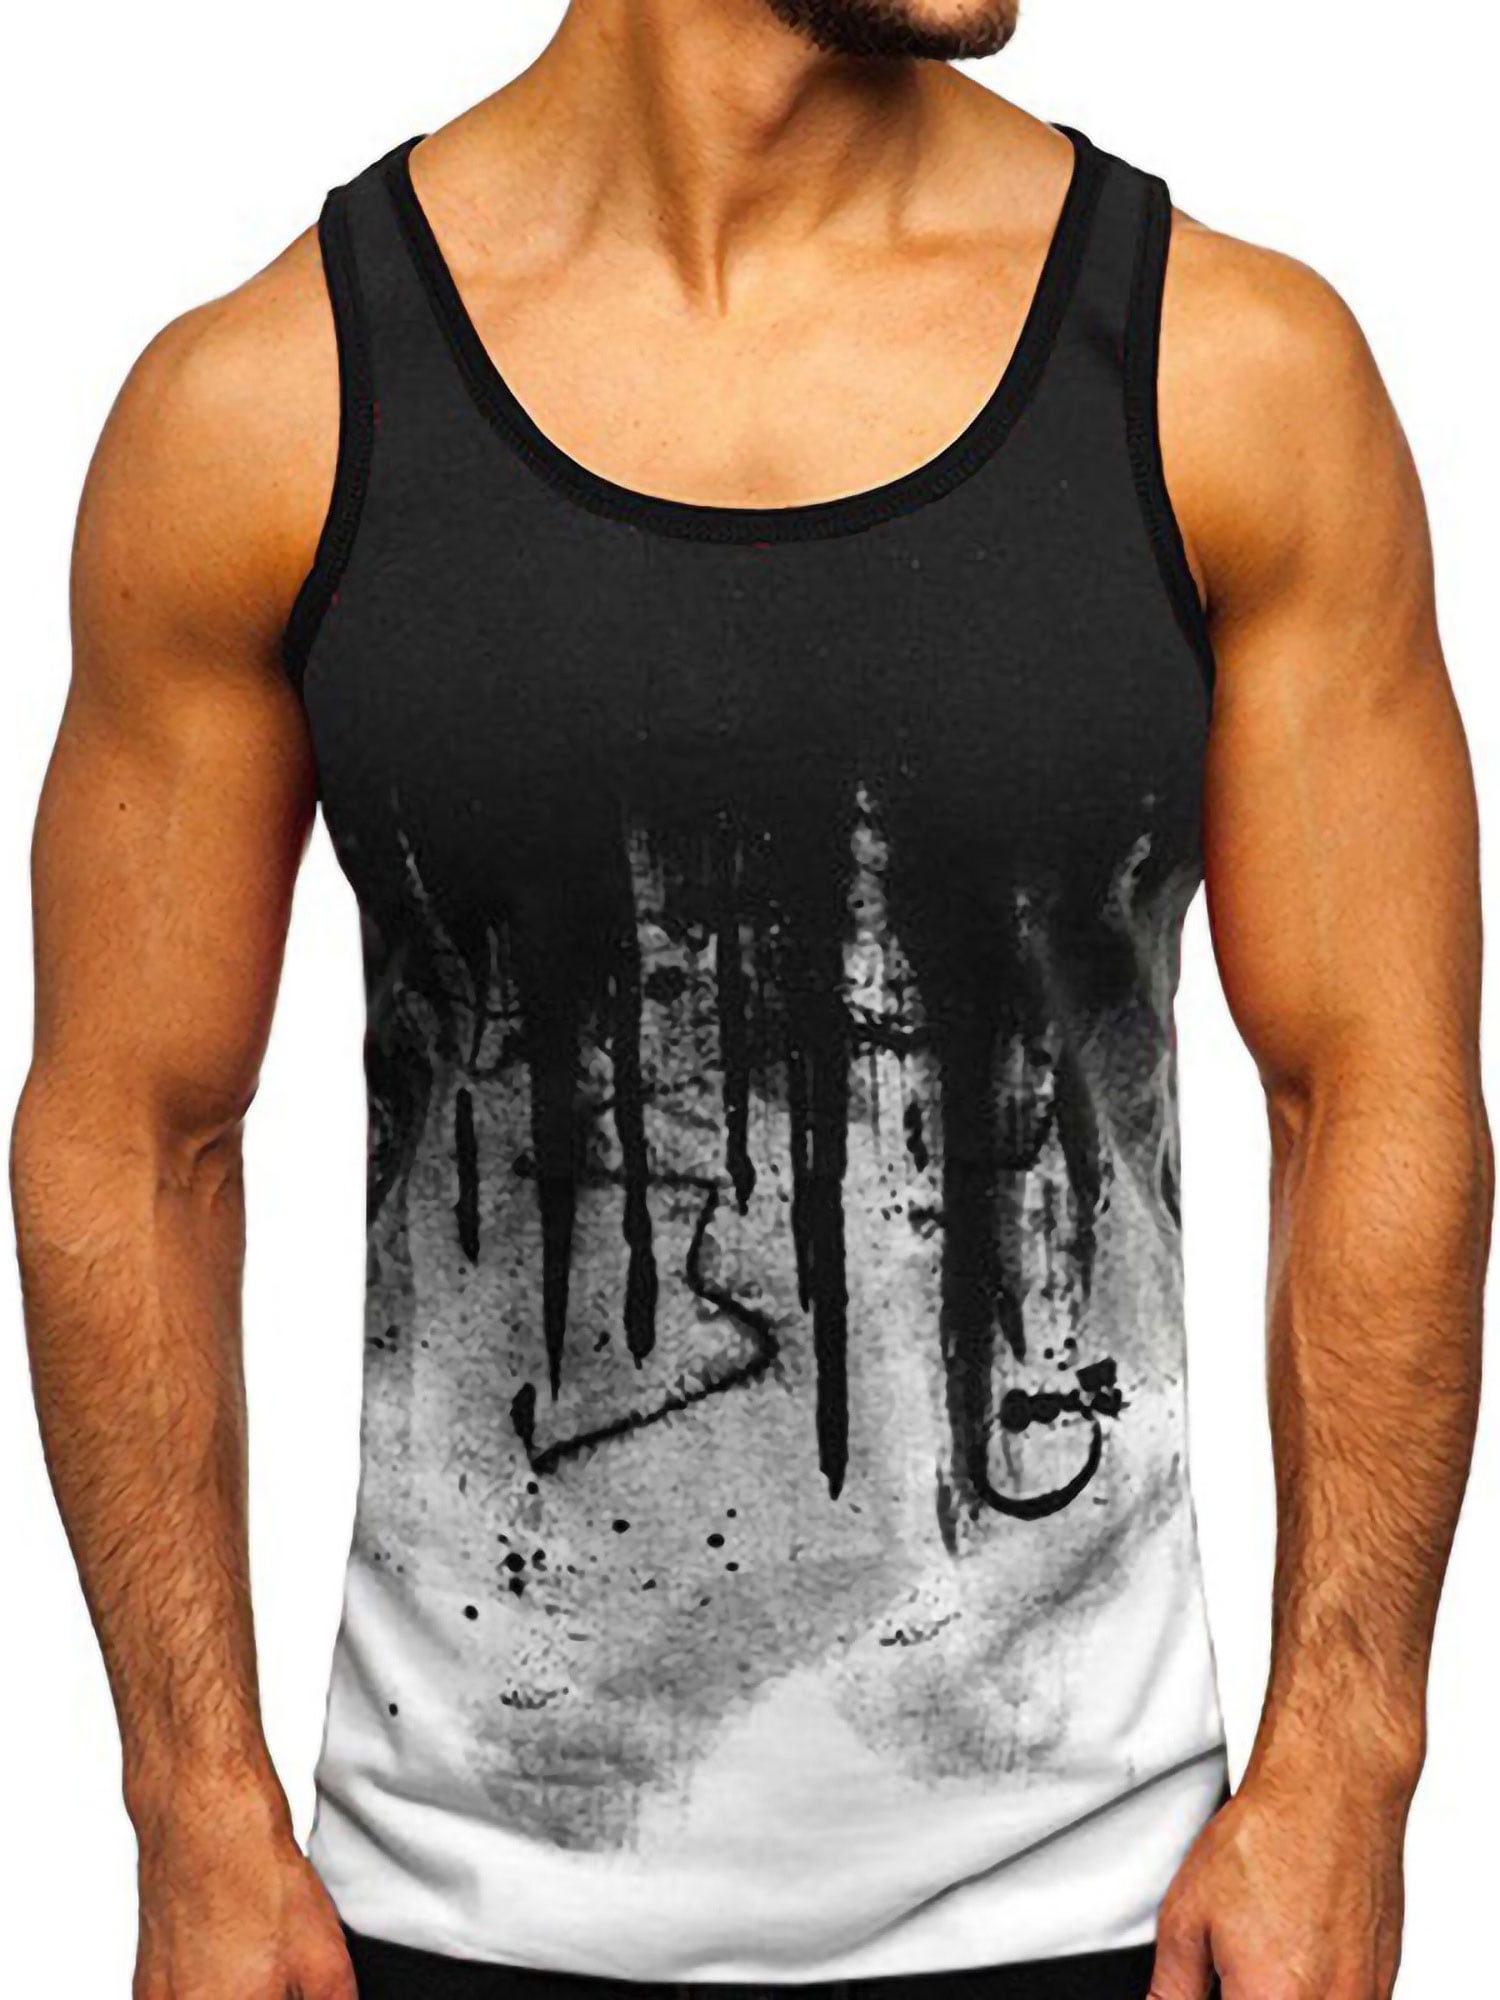 Summer Mens Vest Slim Fit Sleeveless Vest Tank Top Casual Gym Muscle T Shirt Lot 